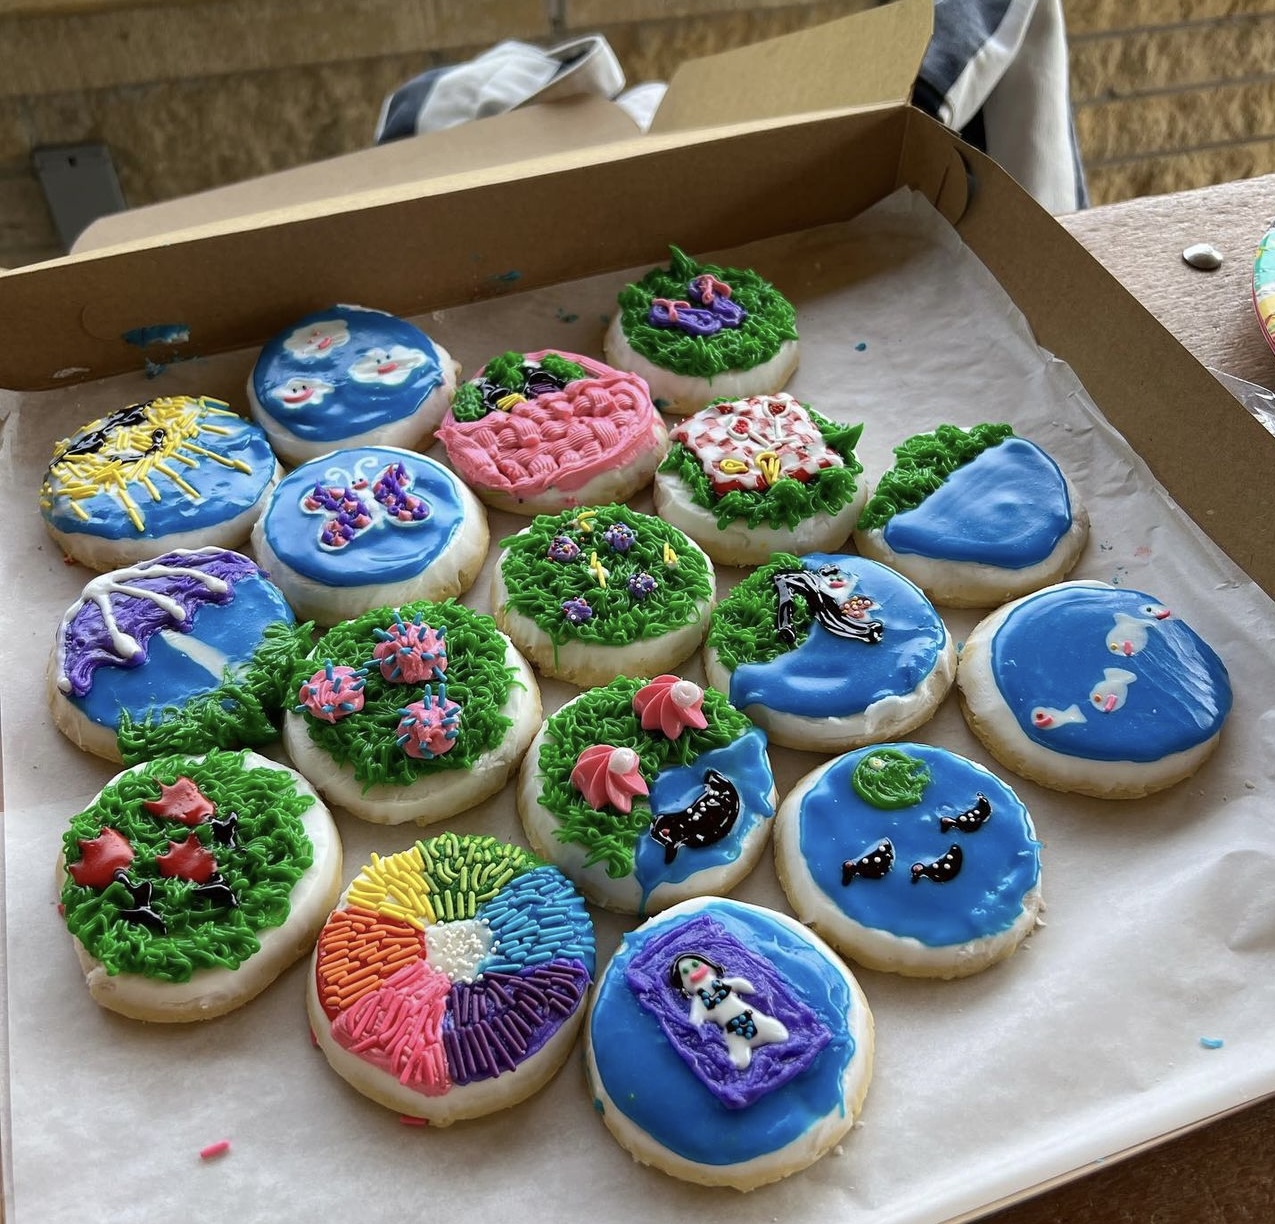 Brightly iced cookies decorated by the residents during their retreat.